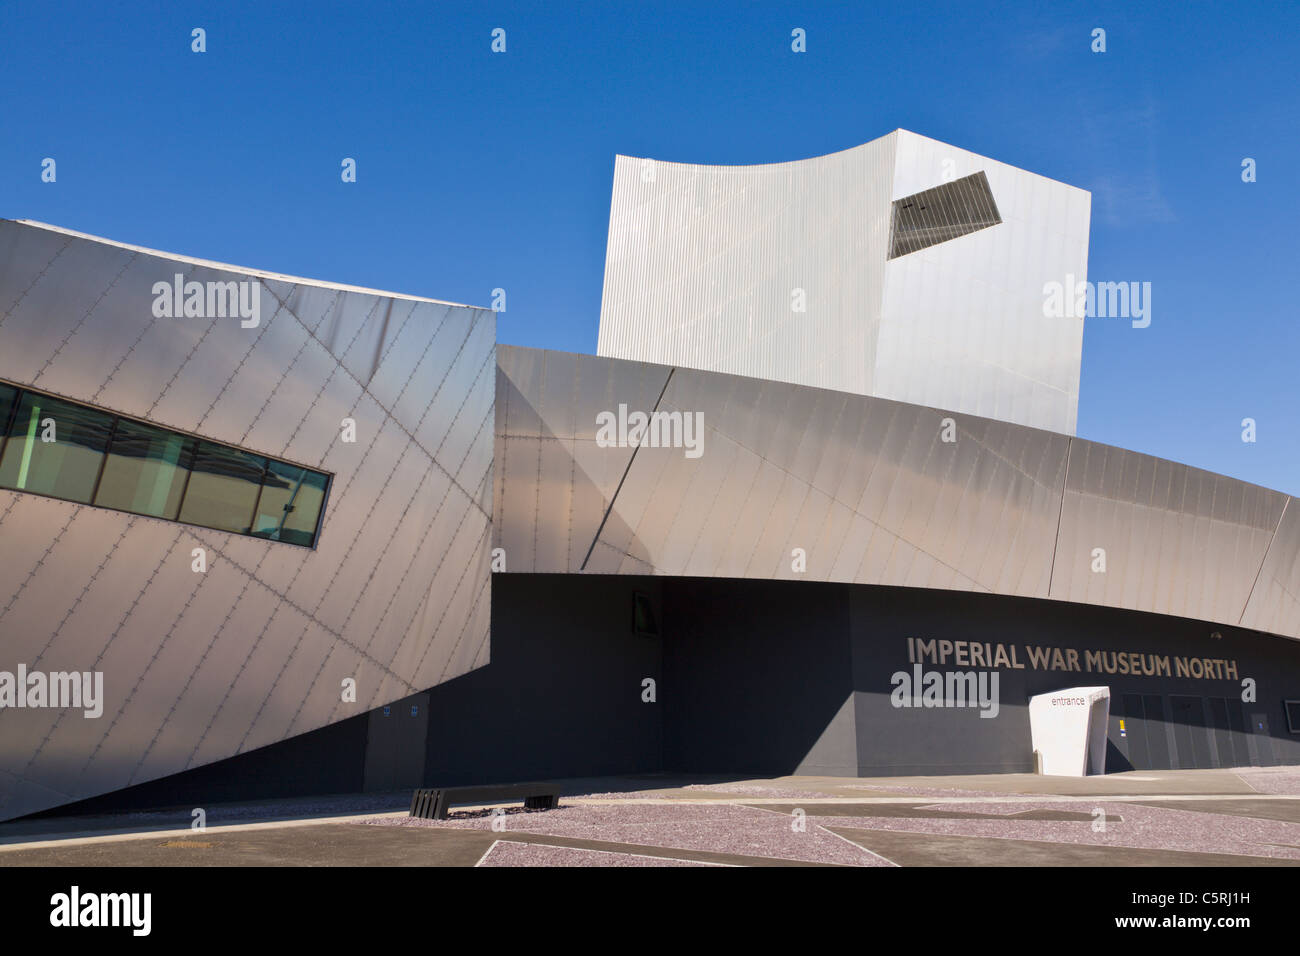 Imperial War Museum North, Salford Quays, Manchester, England Stock Photo